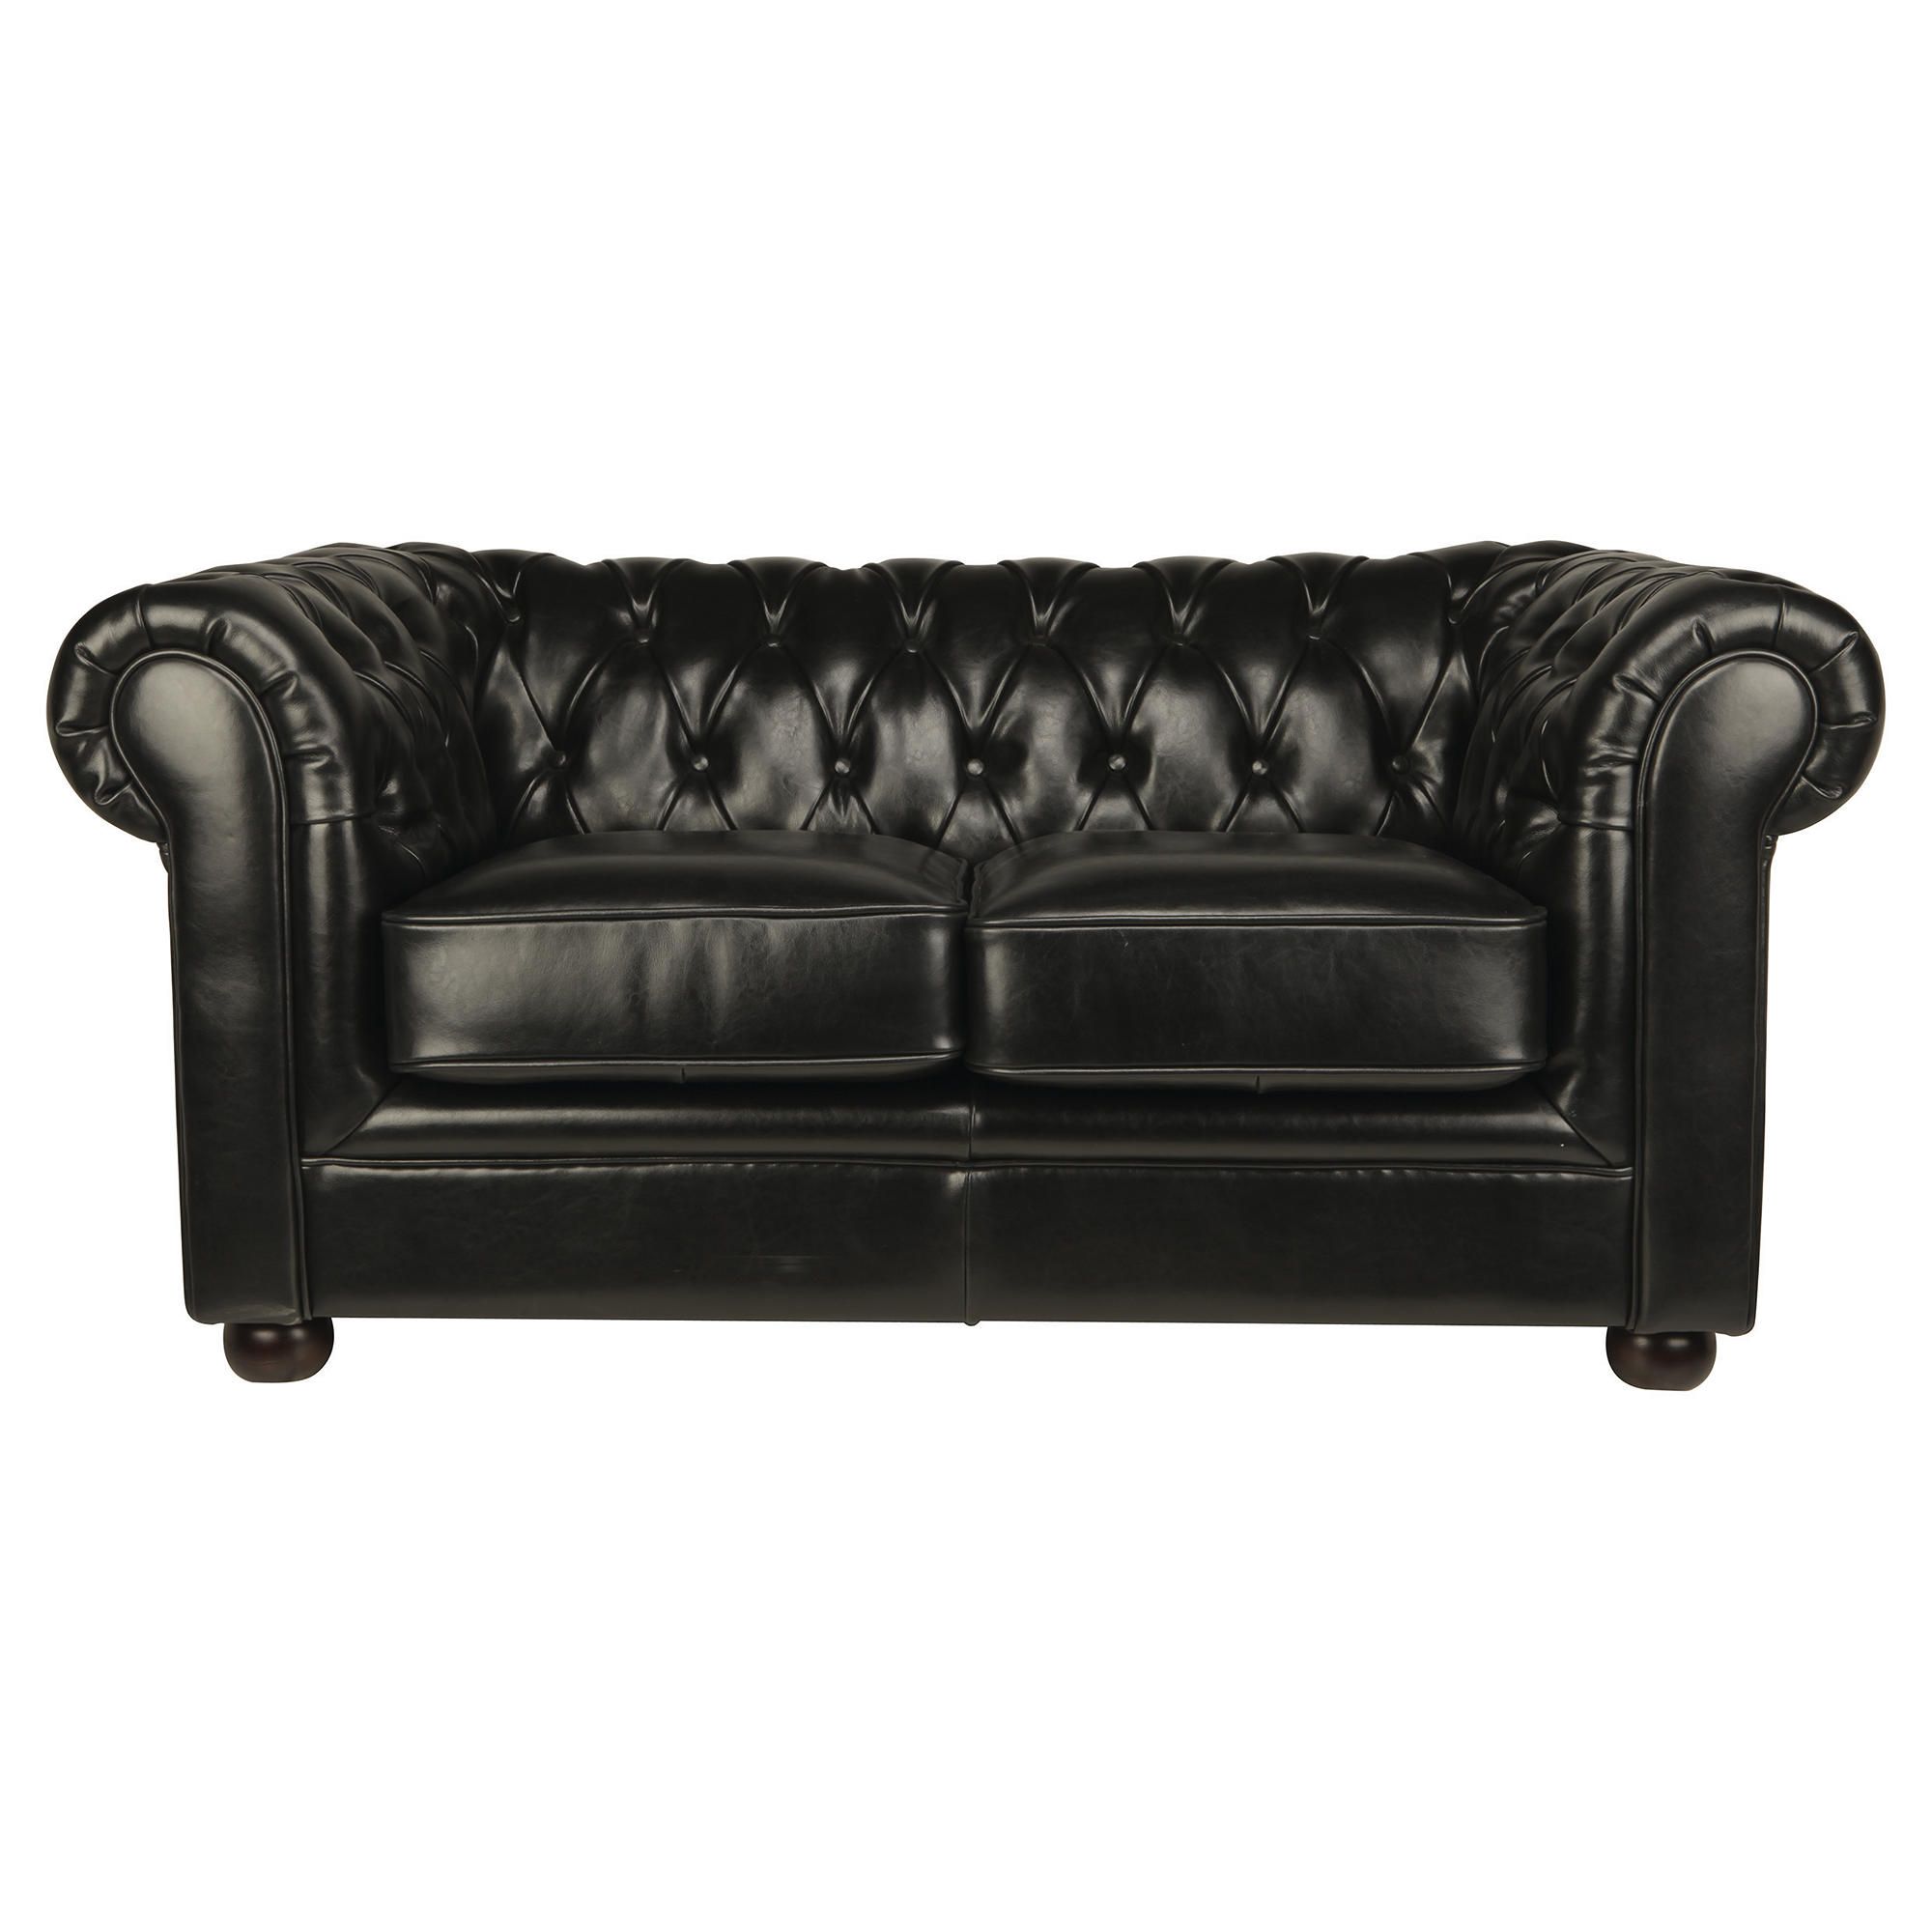 Chesterfield Small Leather Sofa, Black at Tesco Direct